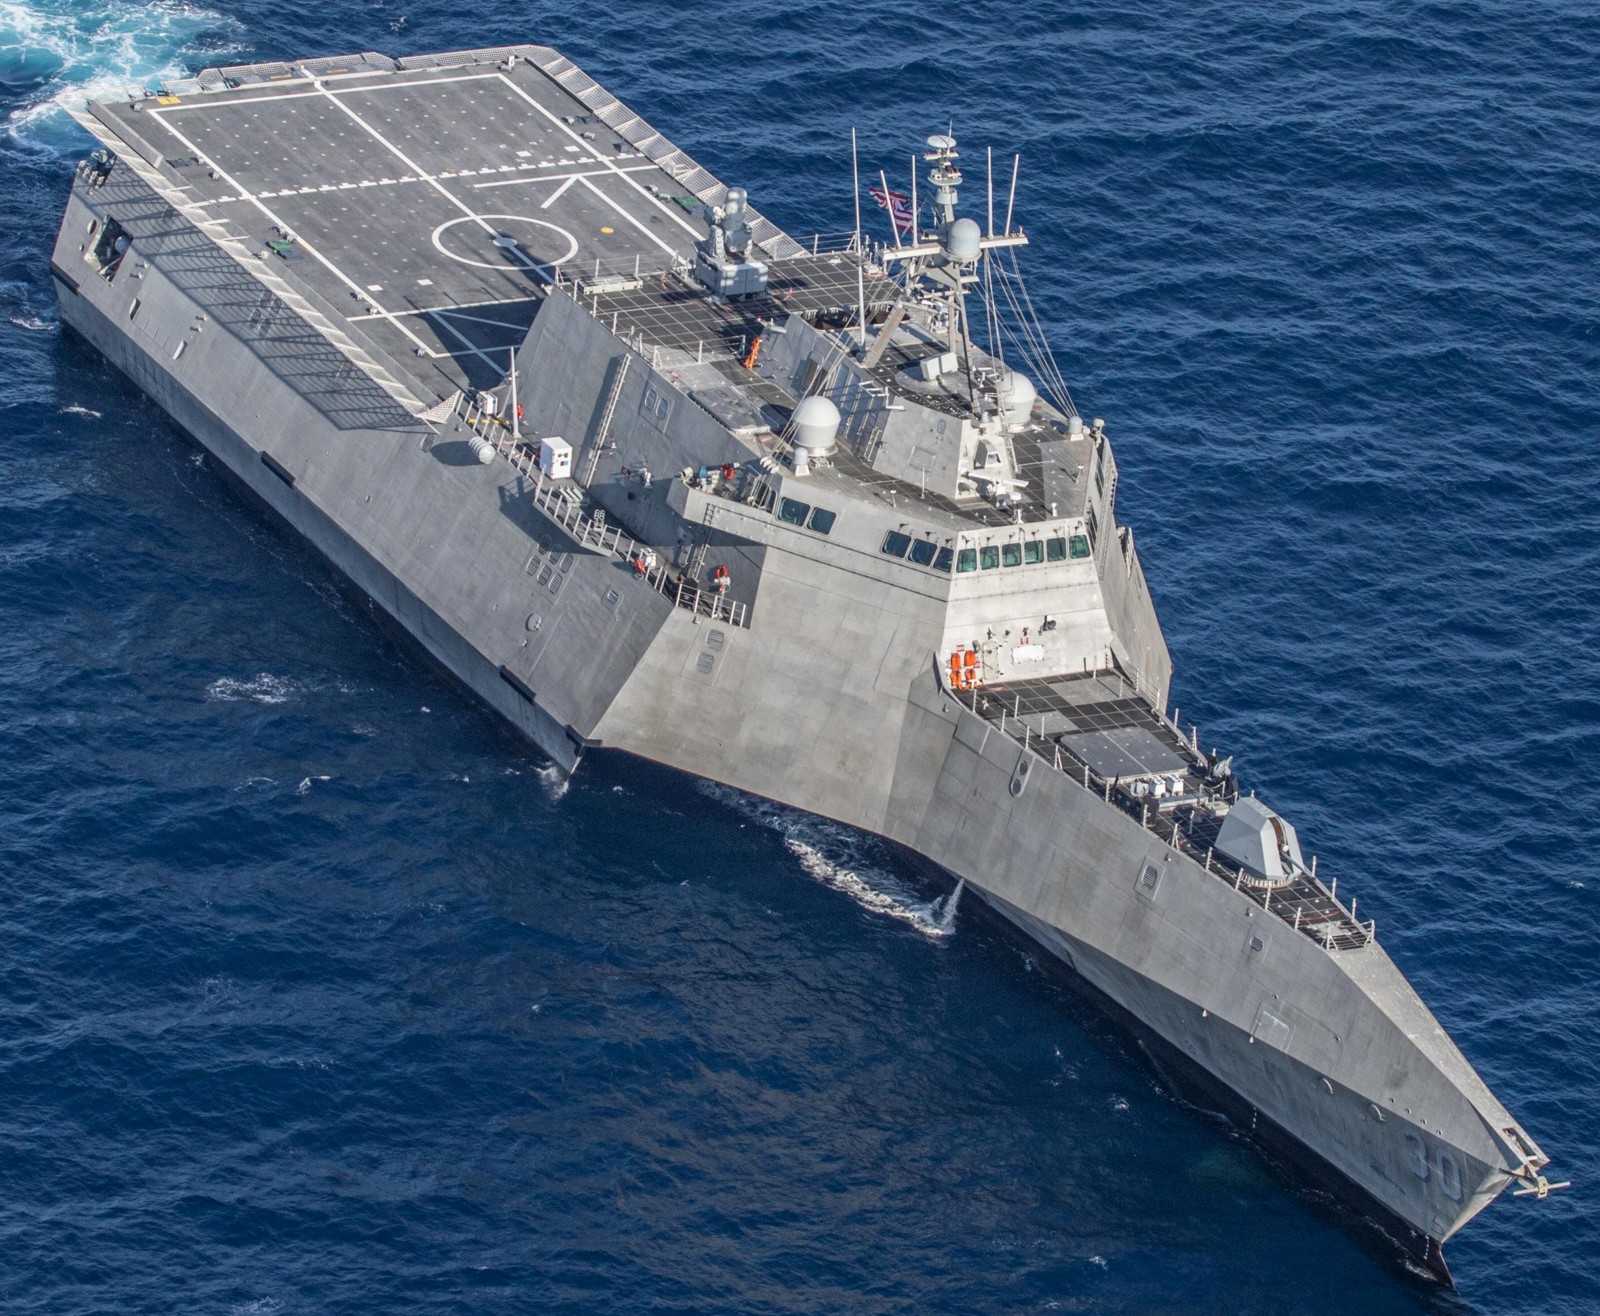 lcs-30 uss canberra littoral combat ship independence class us navy 25